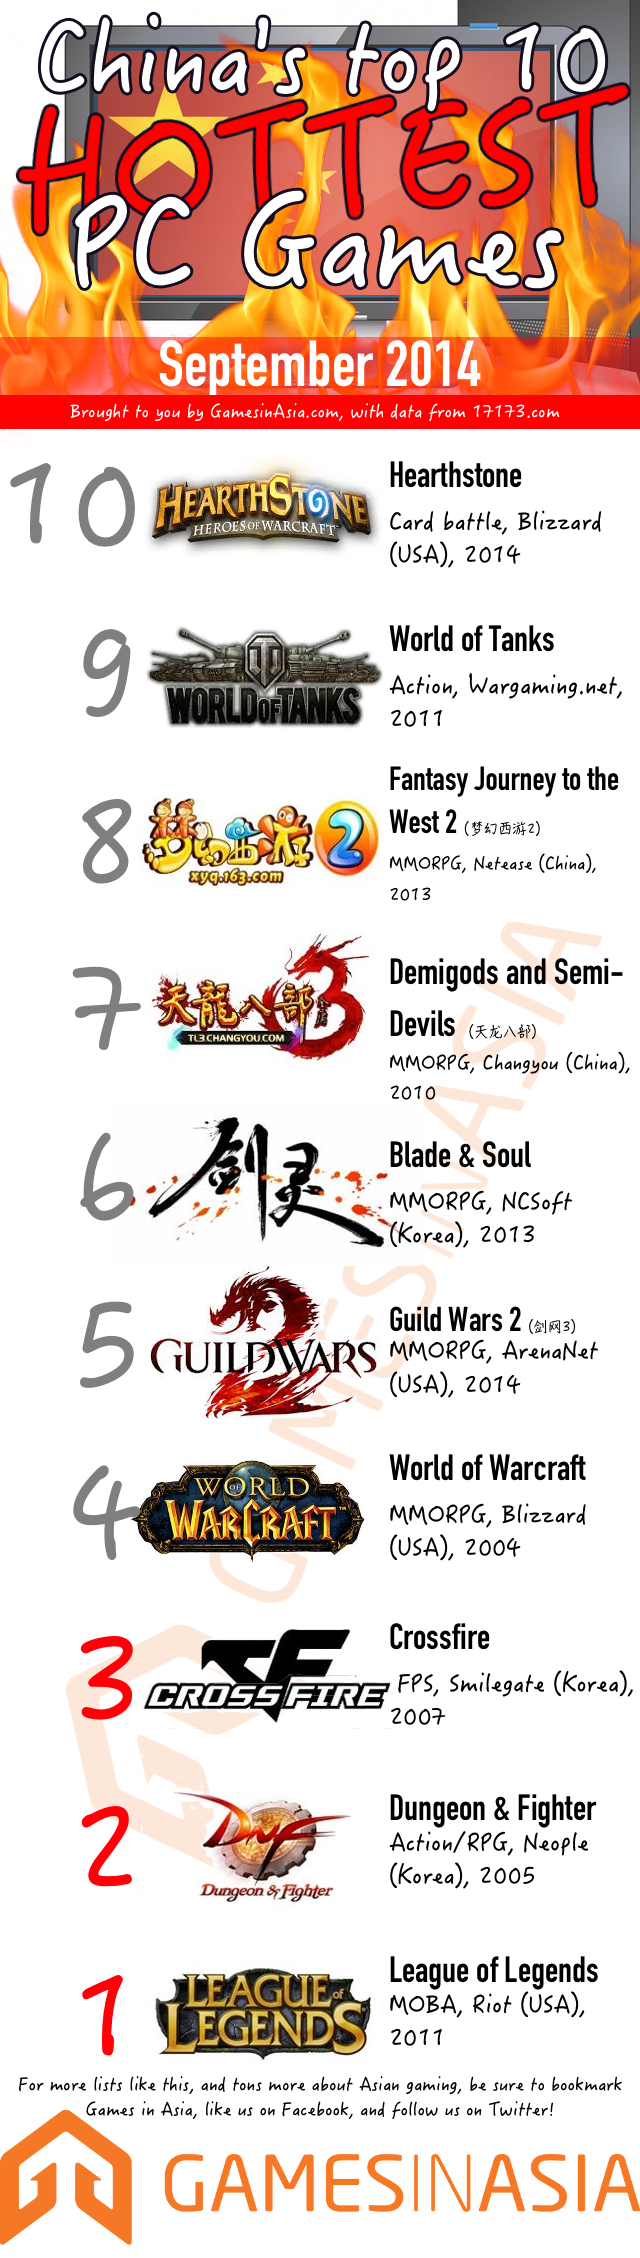 Validatie Kwestie Tapijt The top 10 hottest PC games in China (September 2014)